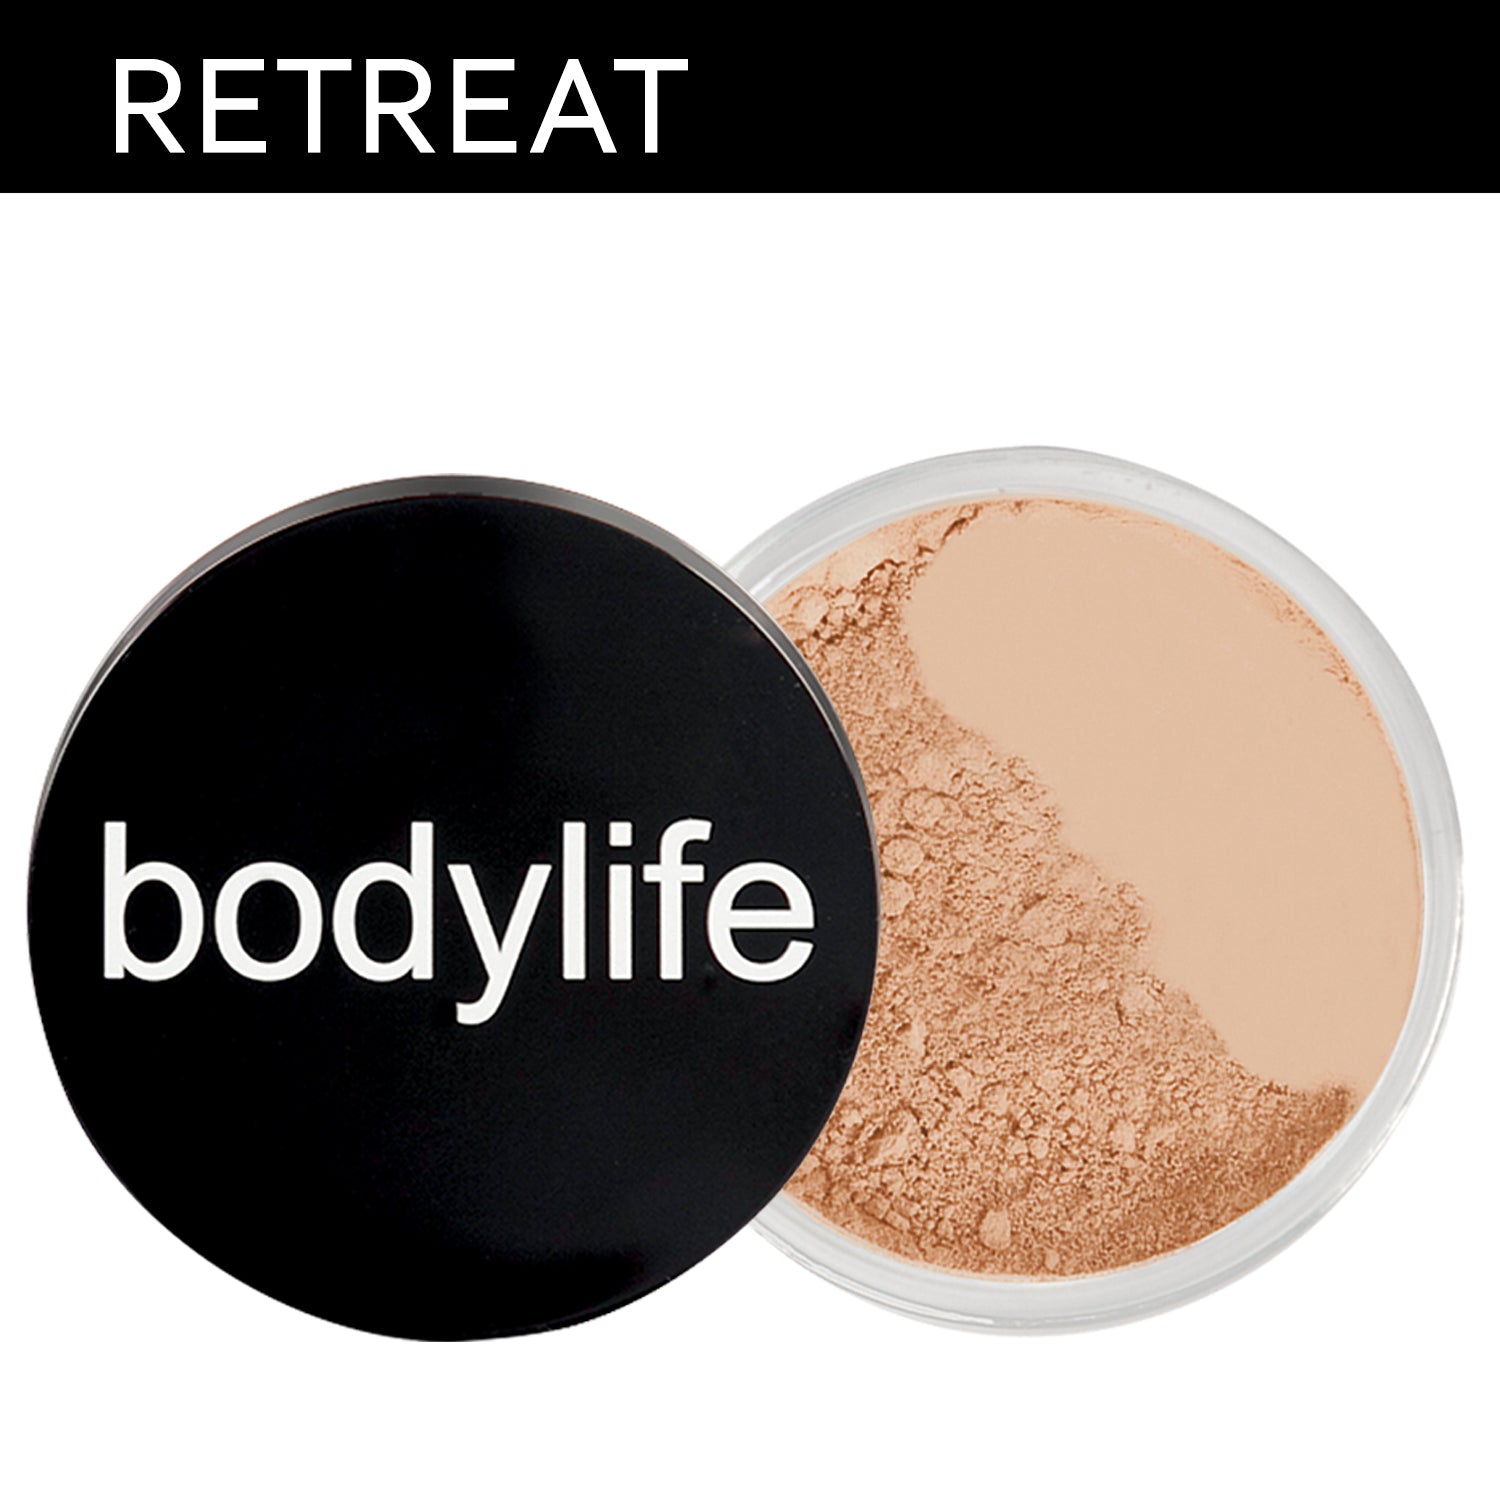 Bodylife Beauty Makeup Natural Mineral Foundation Face Powder Retreat 5g